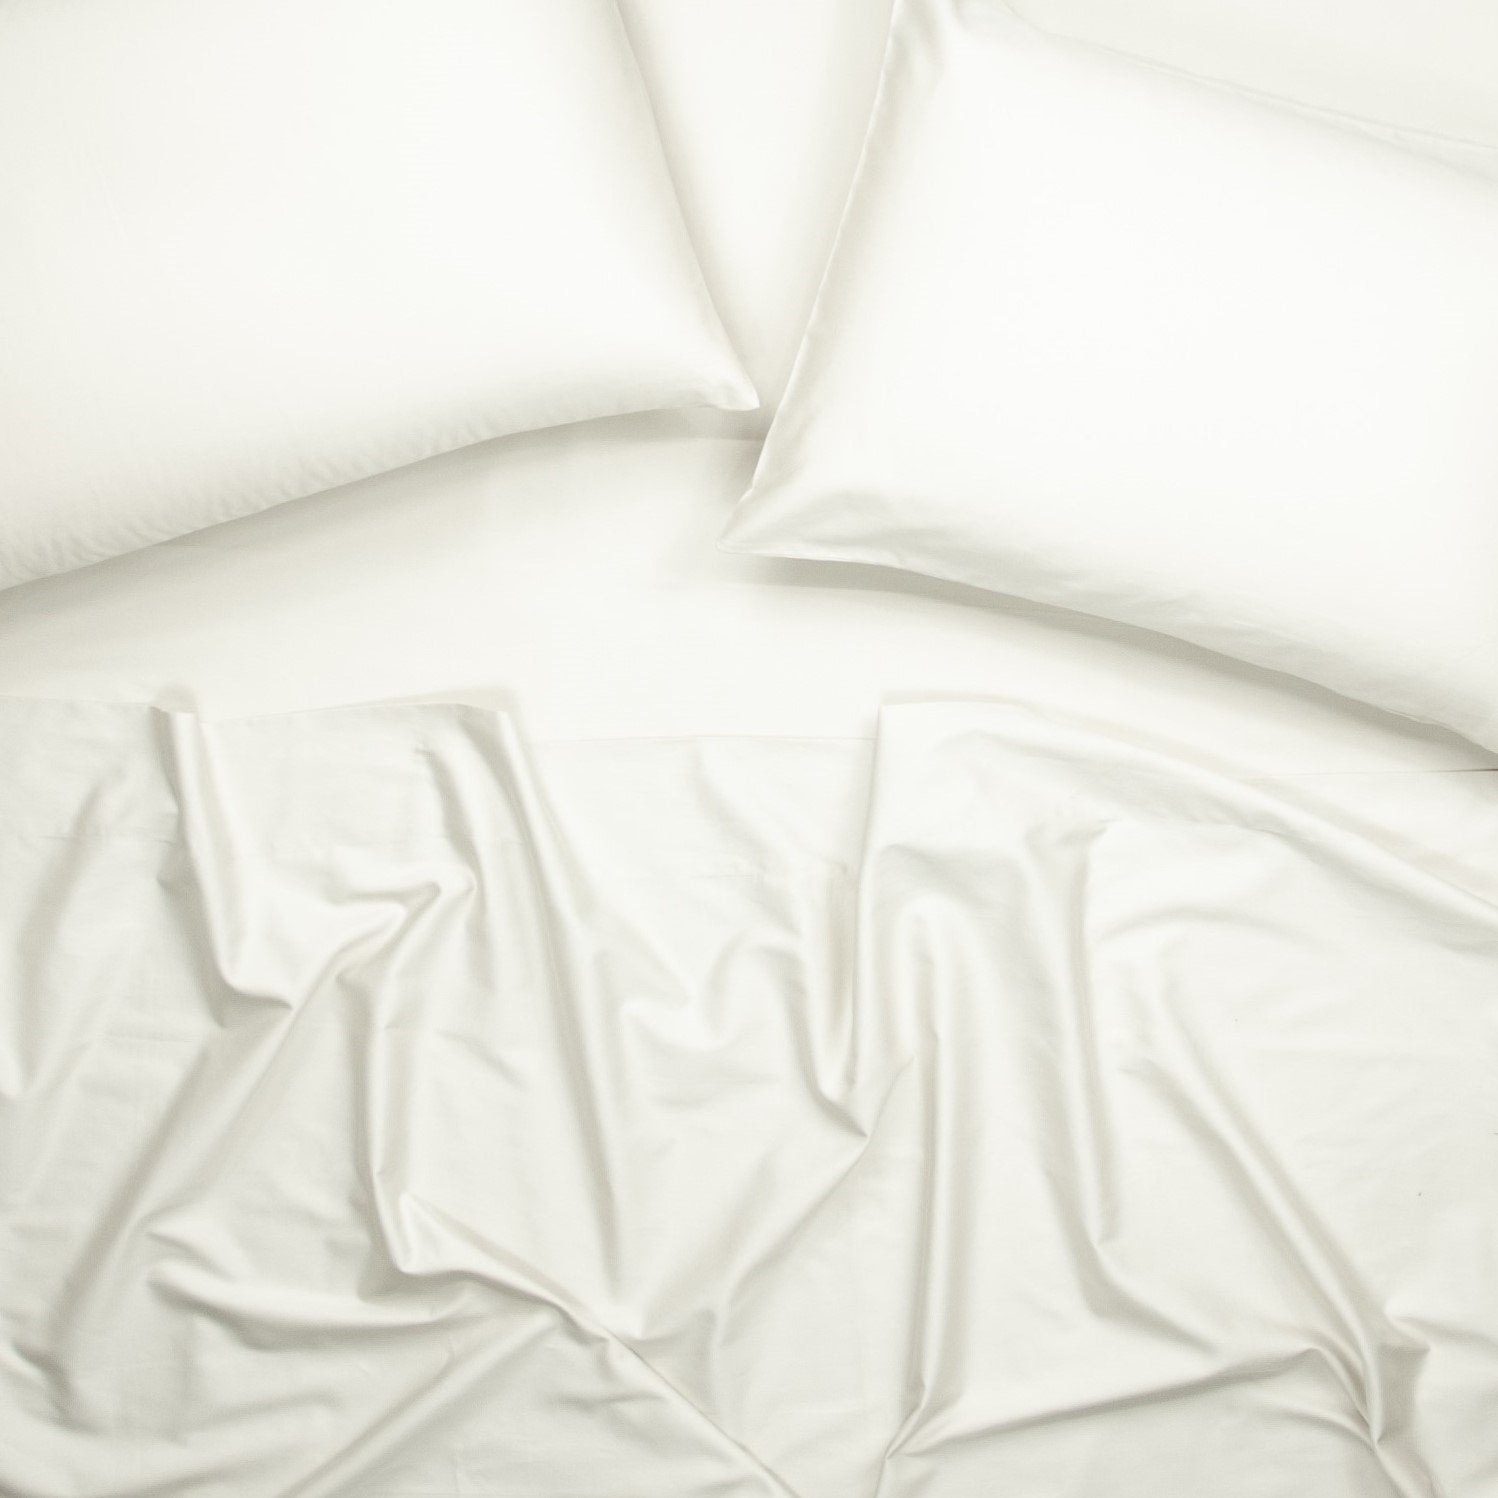 Birds eye view of organic cotton bed sheets with pillowcases in warm white